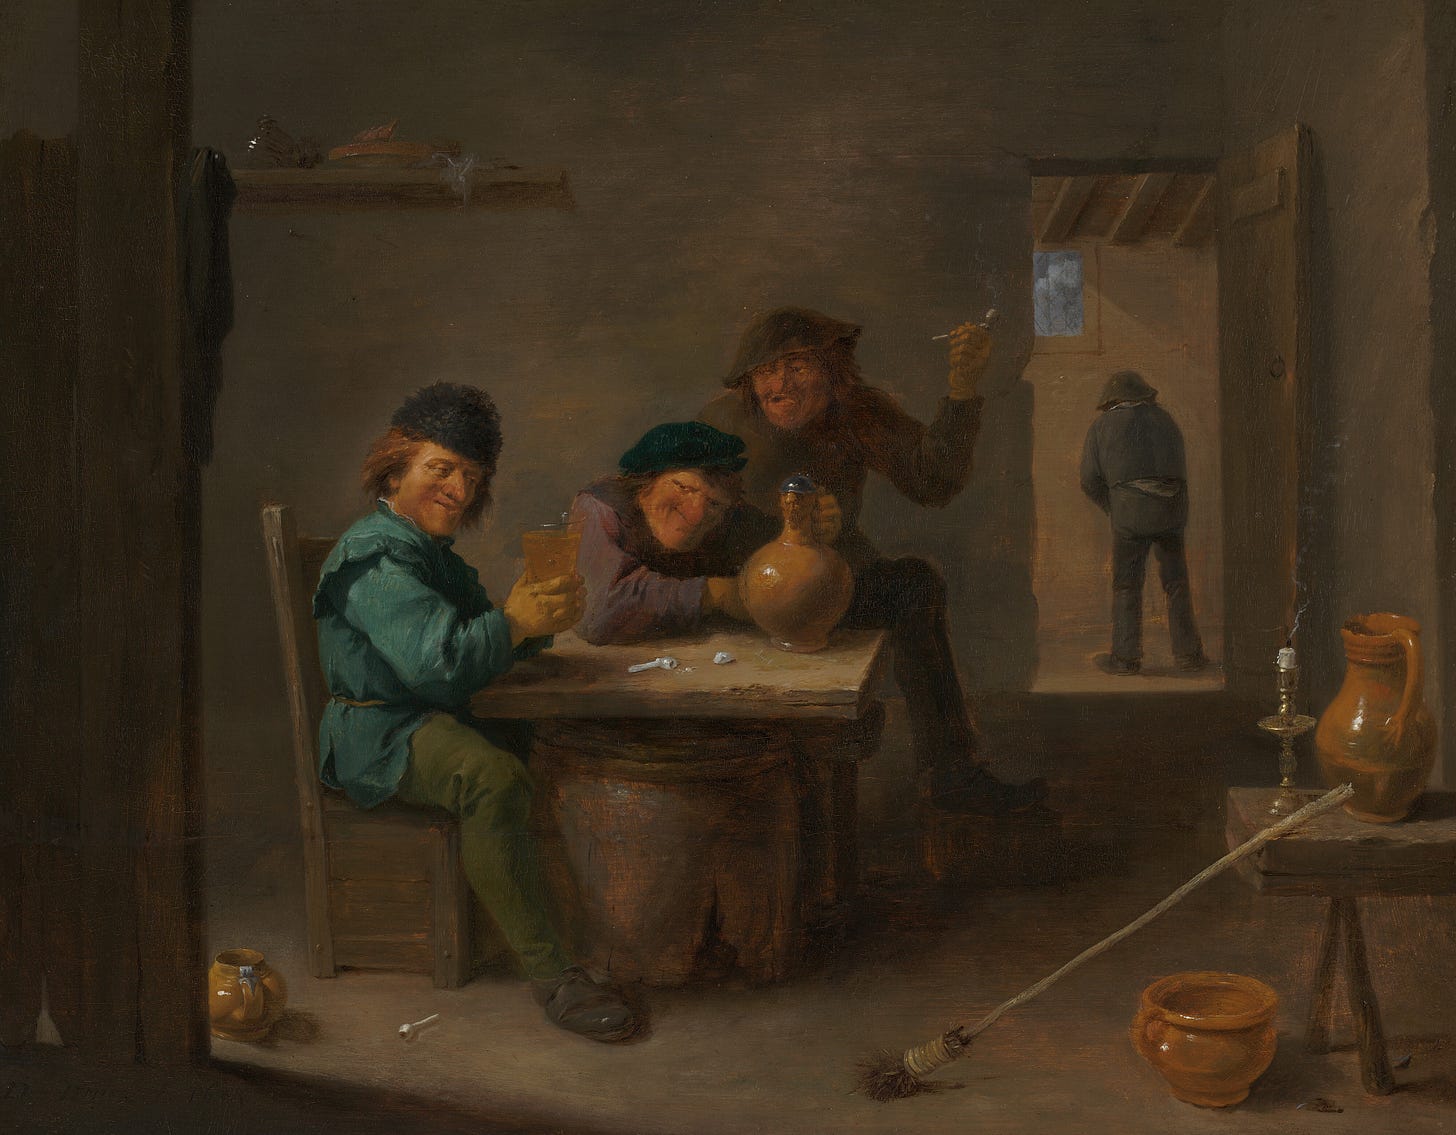 Peasants in a Tavern, c. 1633 by David Teniers the Younger